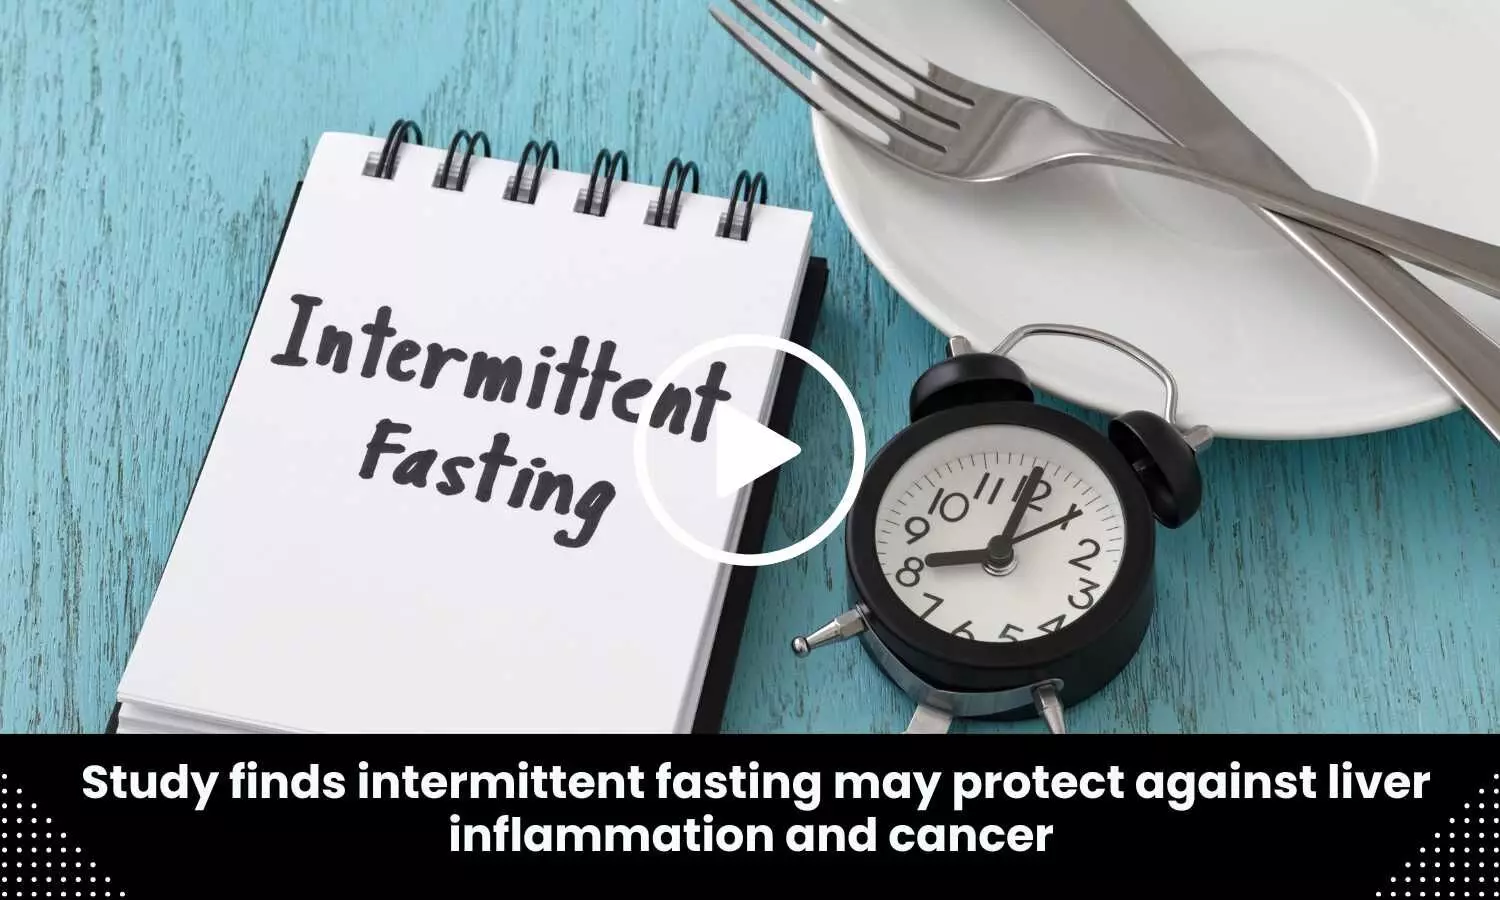 Study finds intermittent fasting may protect against liver inflammation and cancer